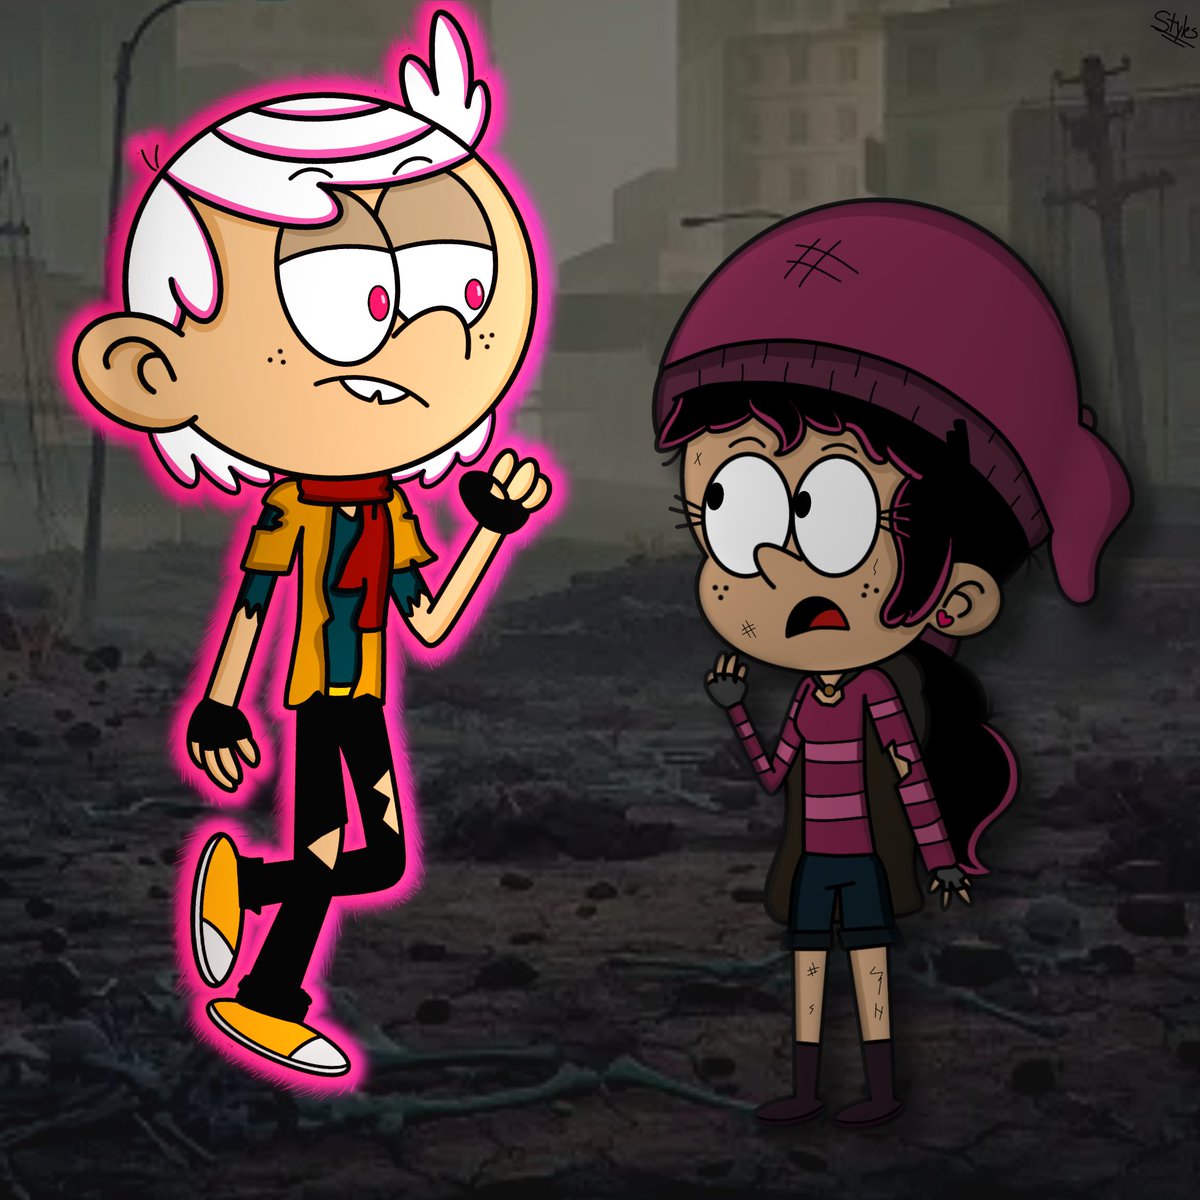 Secretos Revelados. #TLH #TheLoudHouse #TheLoudHouseFanart #Fanarts #Nickelodeon #RonnieAnneSantiago #LincolnLoud #Ronniecoln